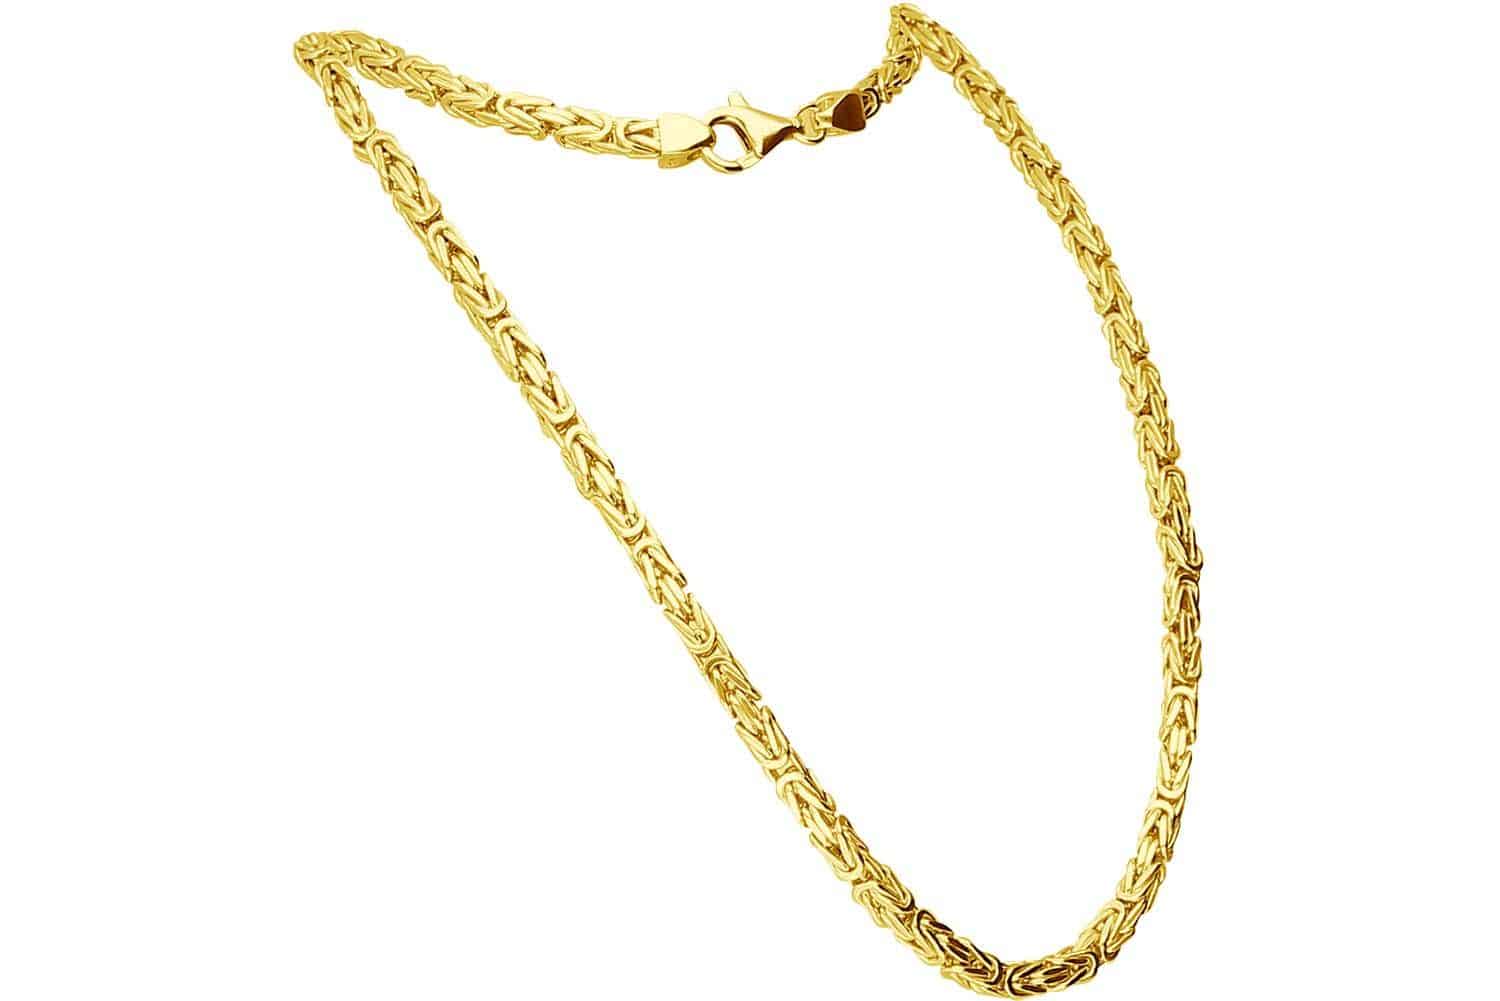 925 silver king chain rhodium-plated / gold-plated